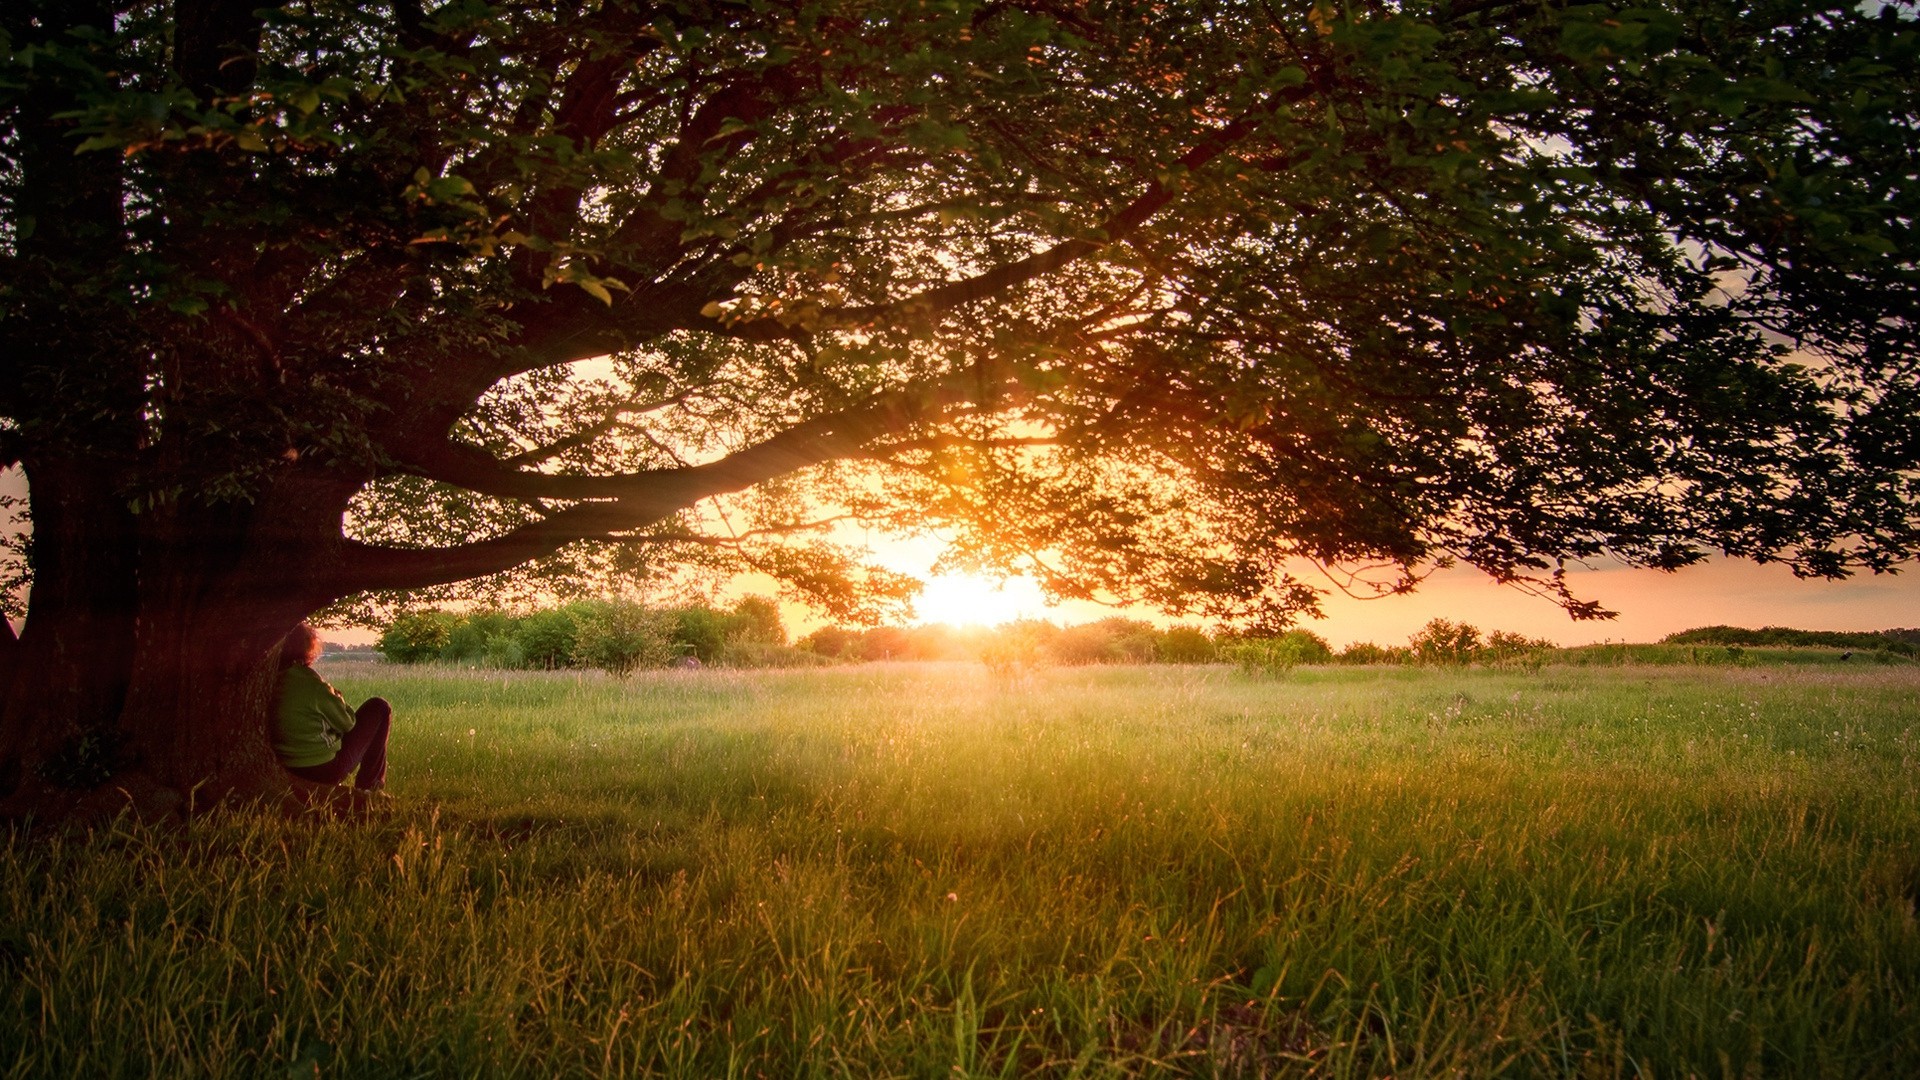 1920x1080 wallpapers: tree, branches, crown, spreading, field, sunset, dreams, evening (image)